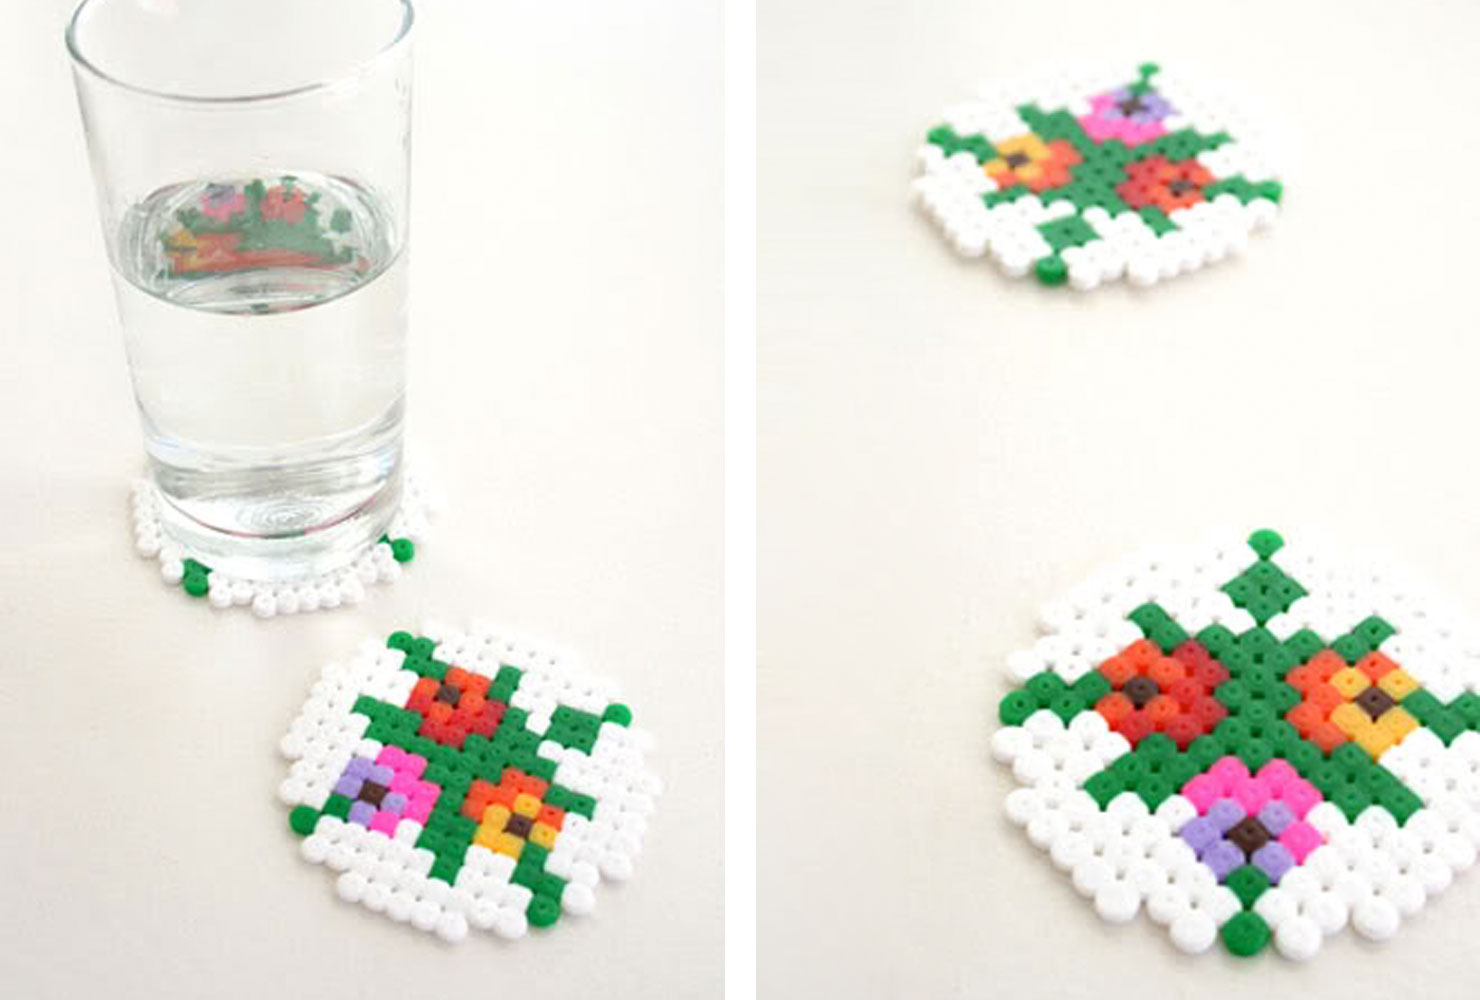 Colorful plastic beads ironed into coasters